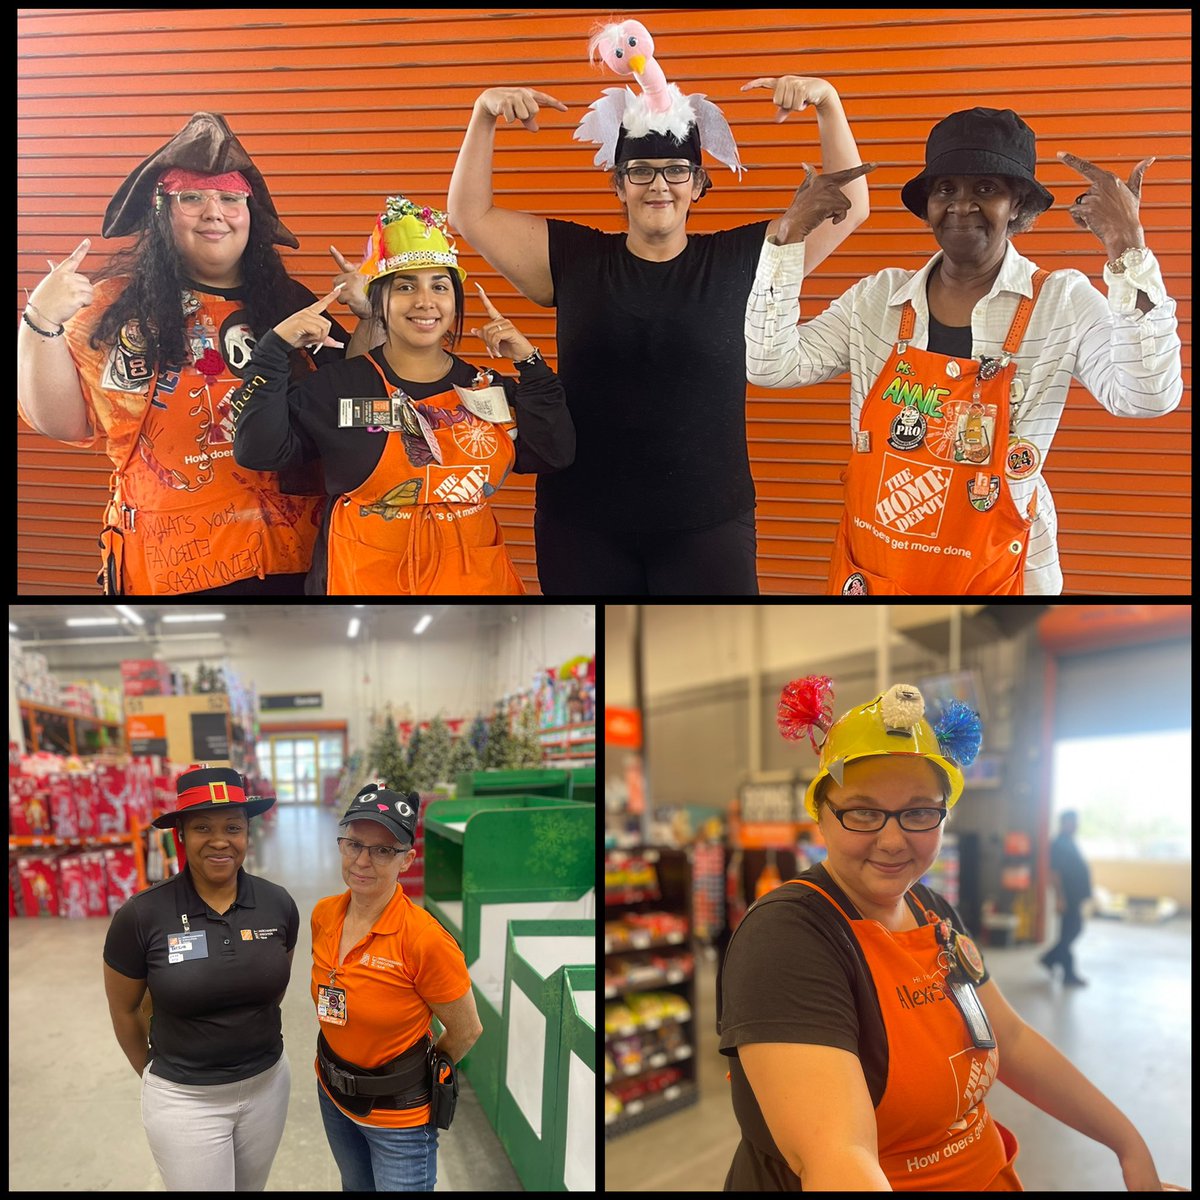 Crazy Hat Day???? What do you think? Baytown produced!! Even our MET team joined in on the celebrations!! #CAM2022 @SedaTalas @JasonElliottt @JarrodFarmer4 @Jerry_Smith_Jr @Kevin_c_lam1111 @idrissi_mary @Guertygirl @Stephen_6507 @KenS_THD6507 @kalahuff6507 @1_MrsHines_only